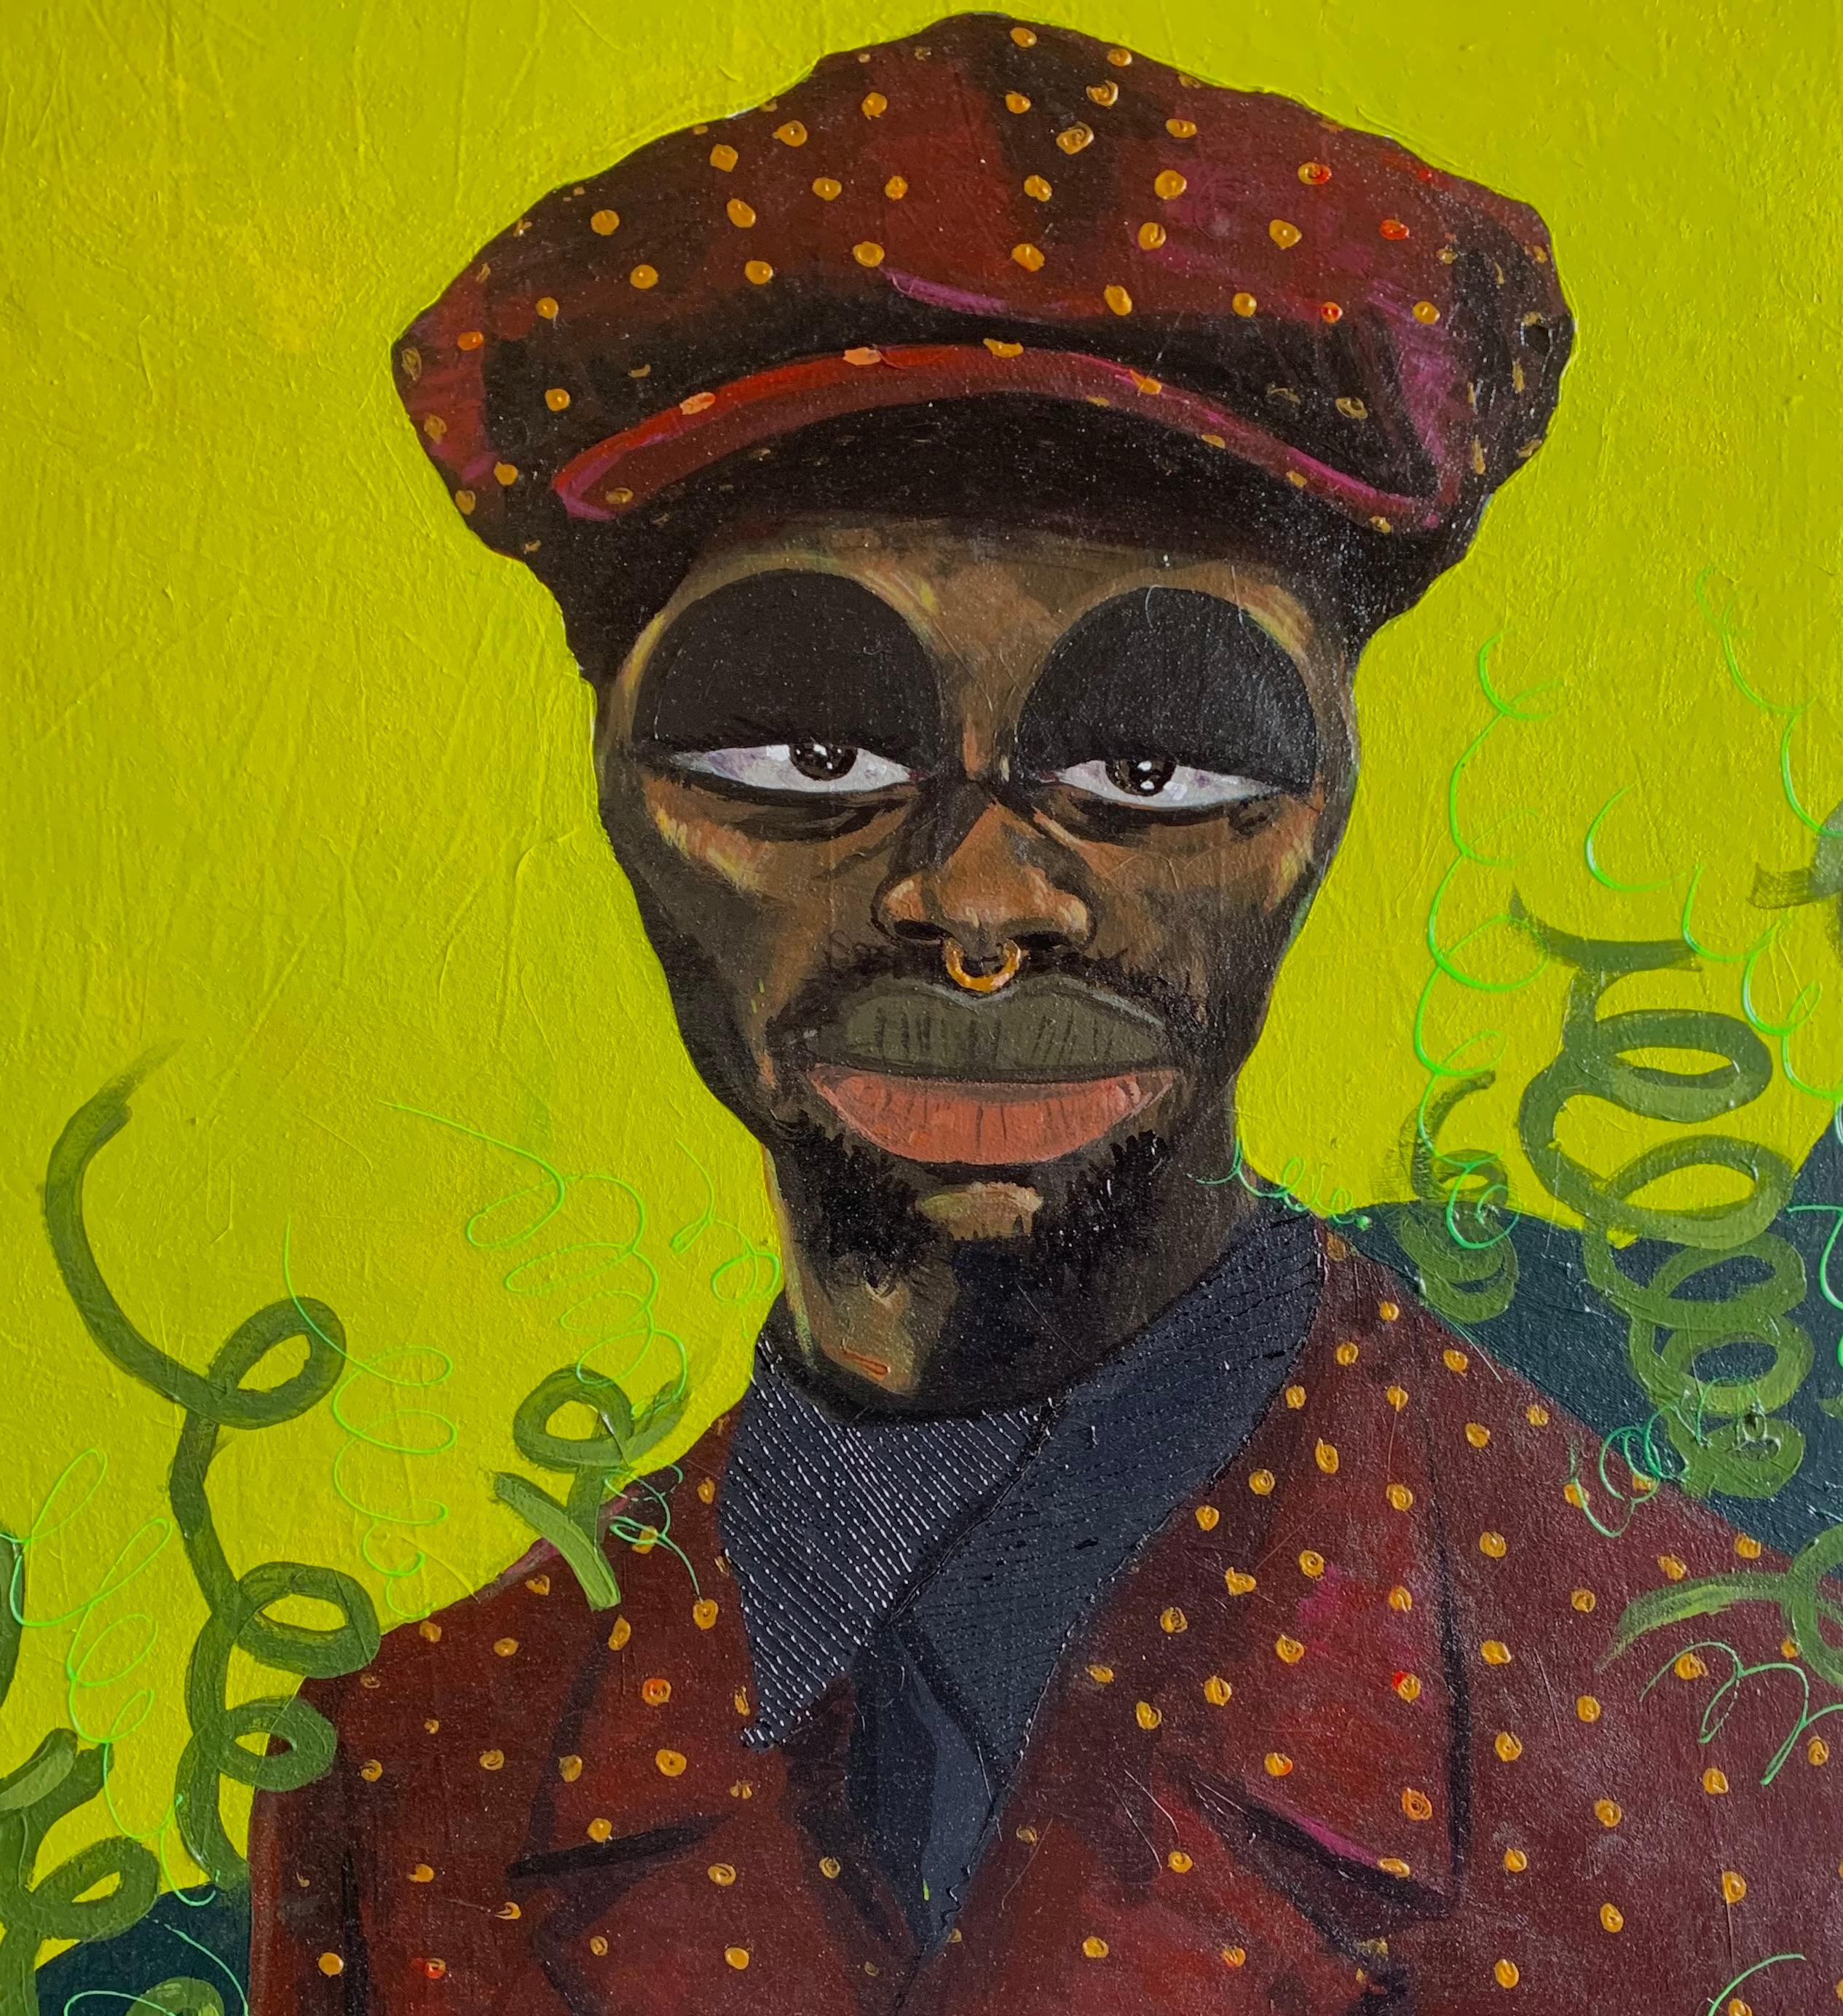 Figurehead - Neo-Expressionist Painting by Omoayo George Osoba